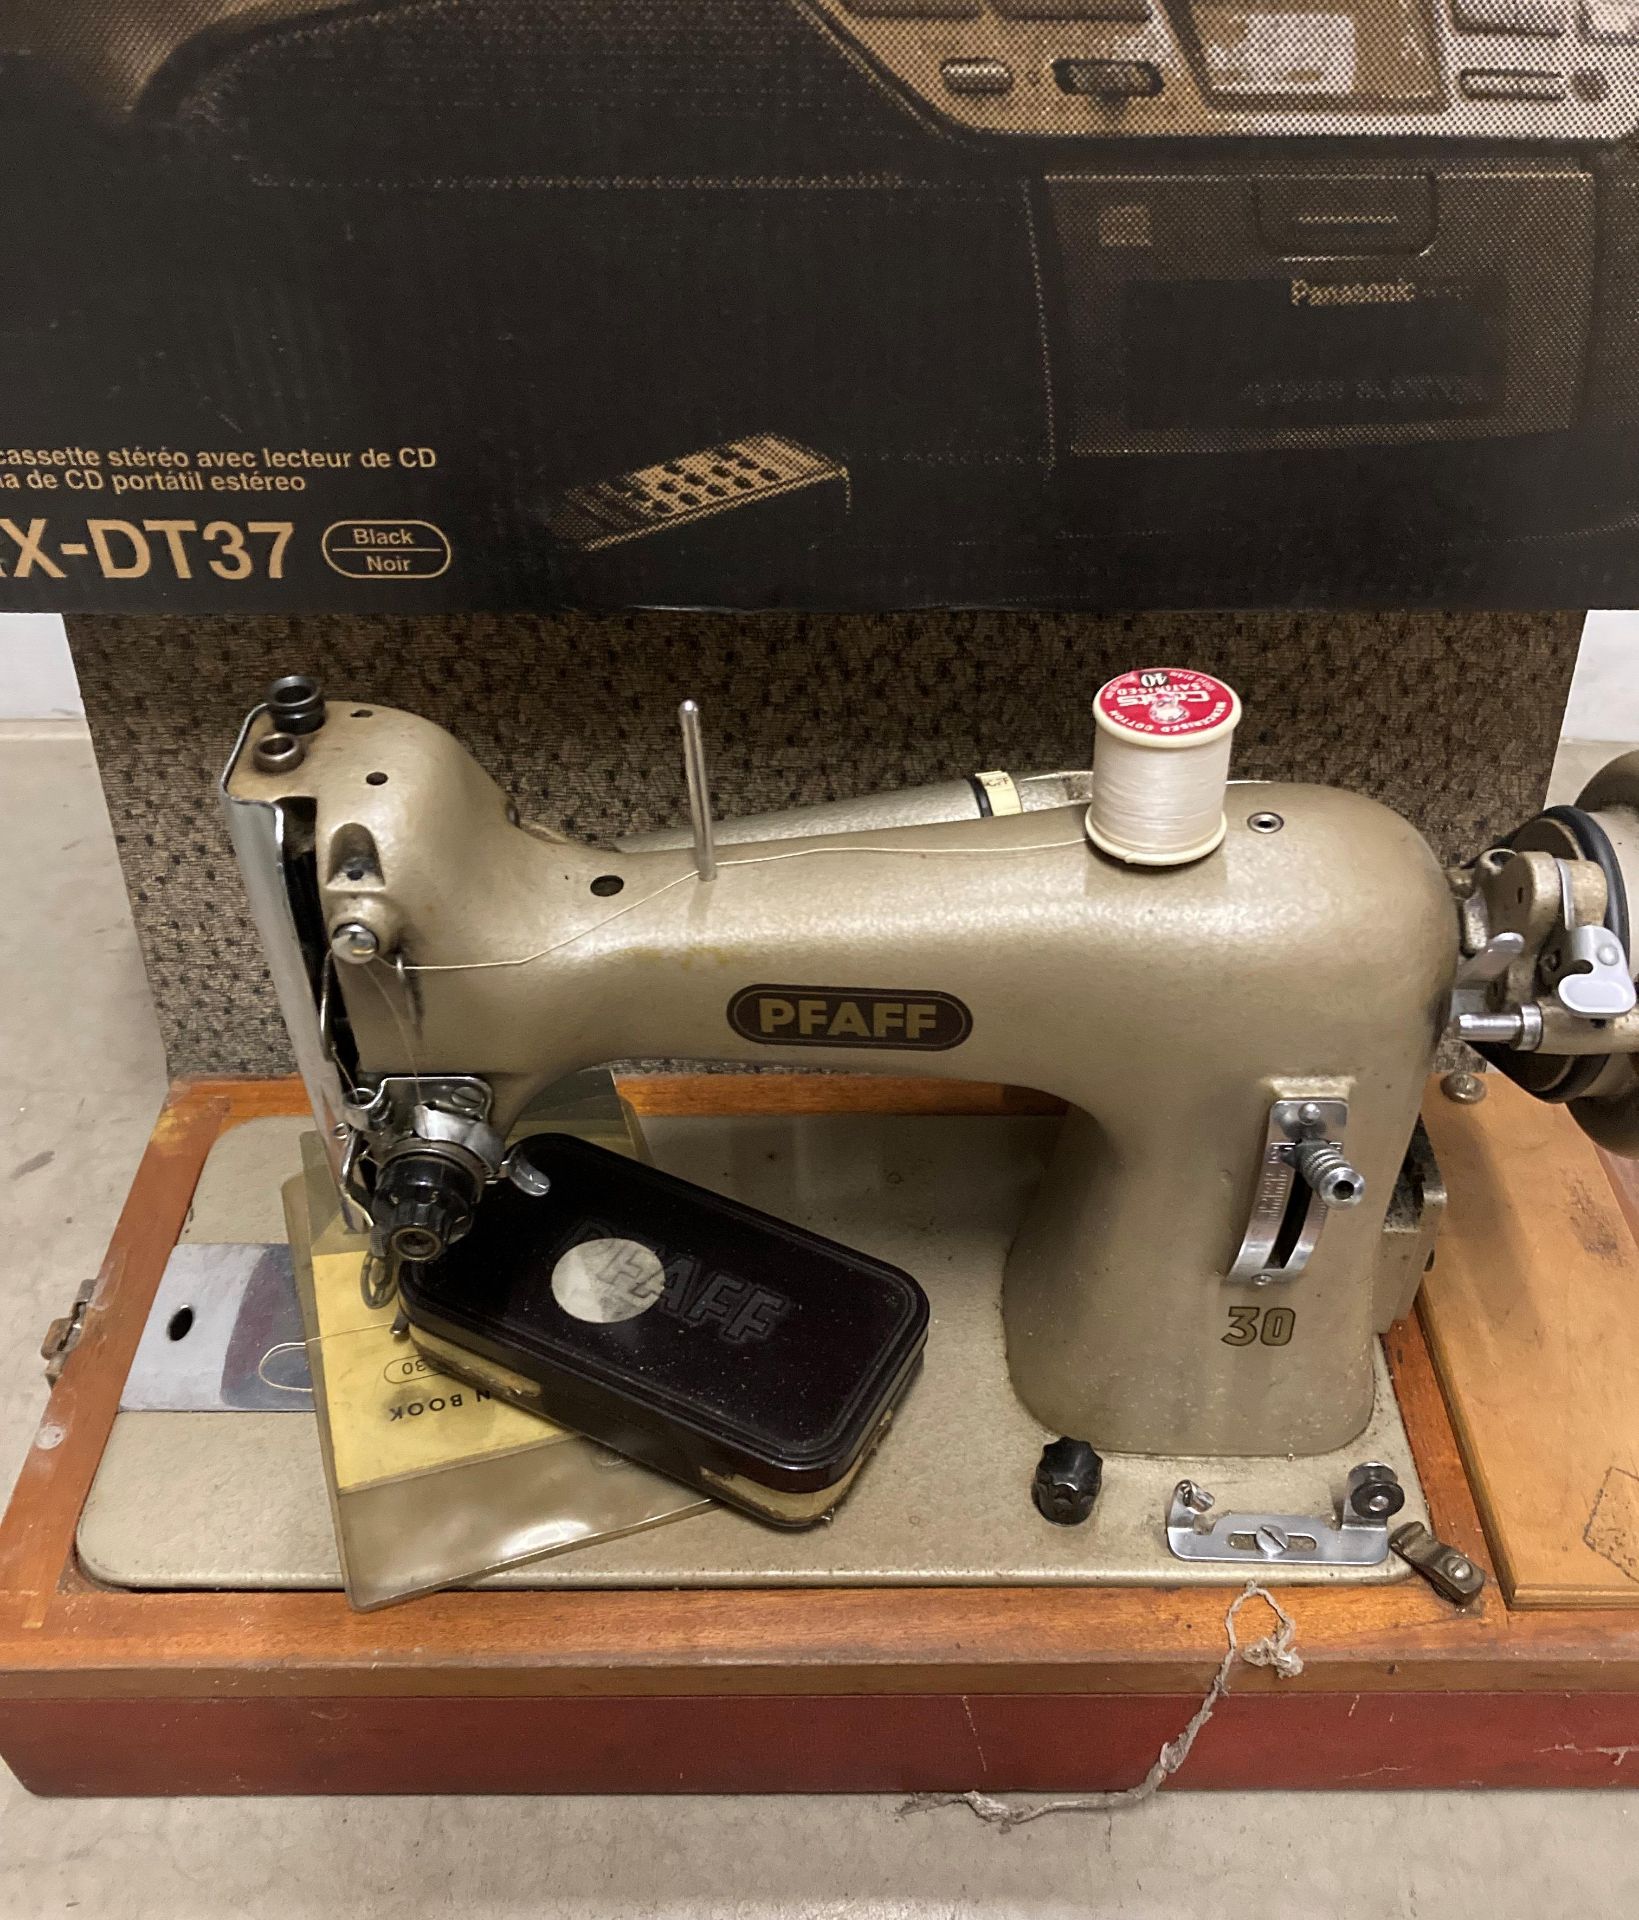 Pfaff 30 electric sewing machine in carry case and a box of assorted sewing accessories - no test, - Image 2 of 3